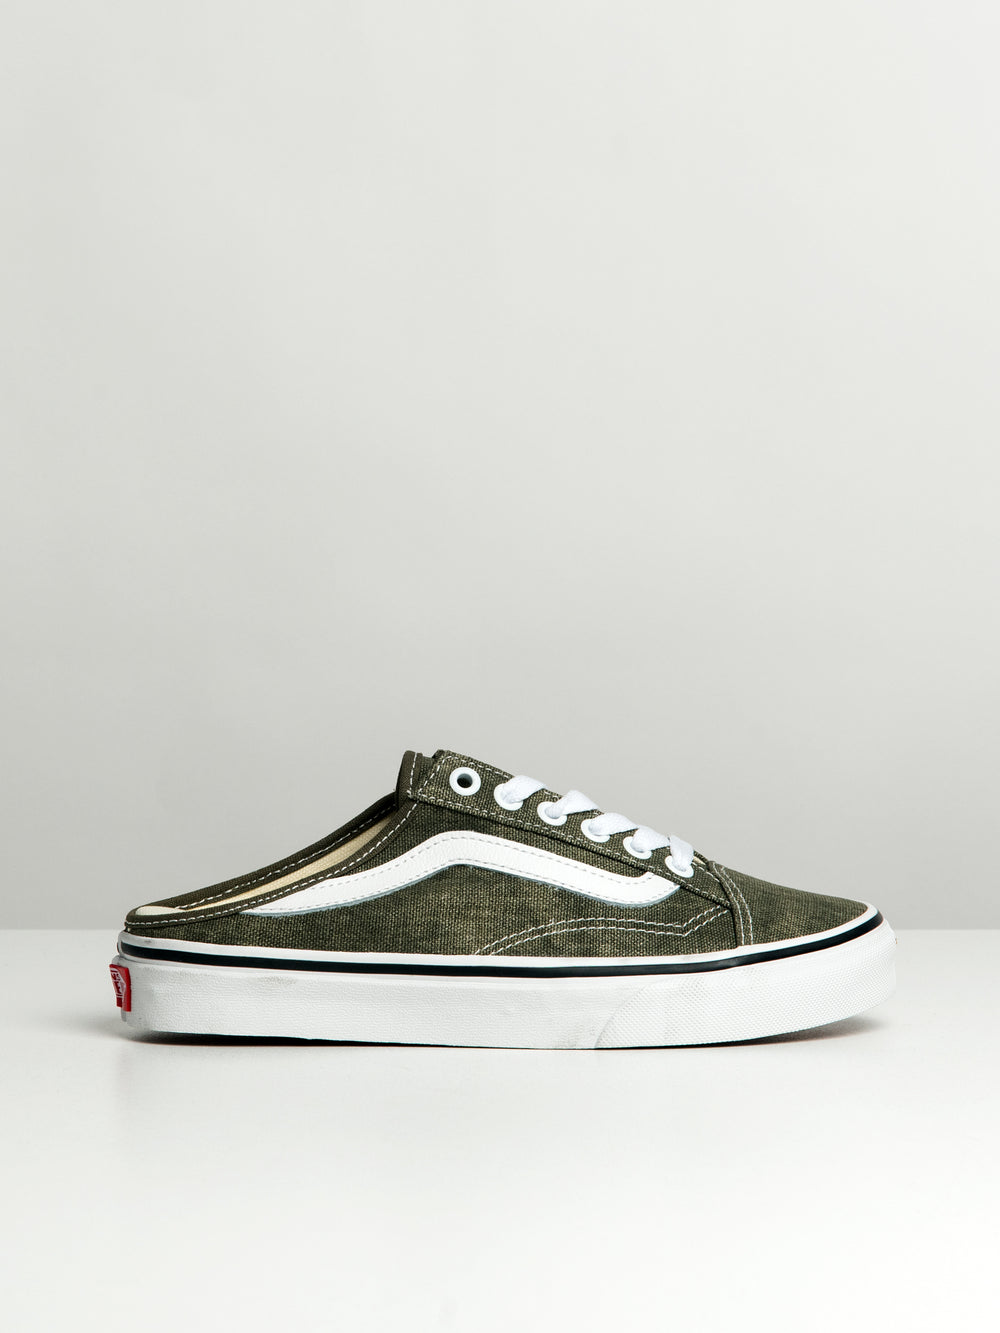 WOMENS VANS STYLE 36 MULE - CLEARANCE